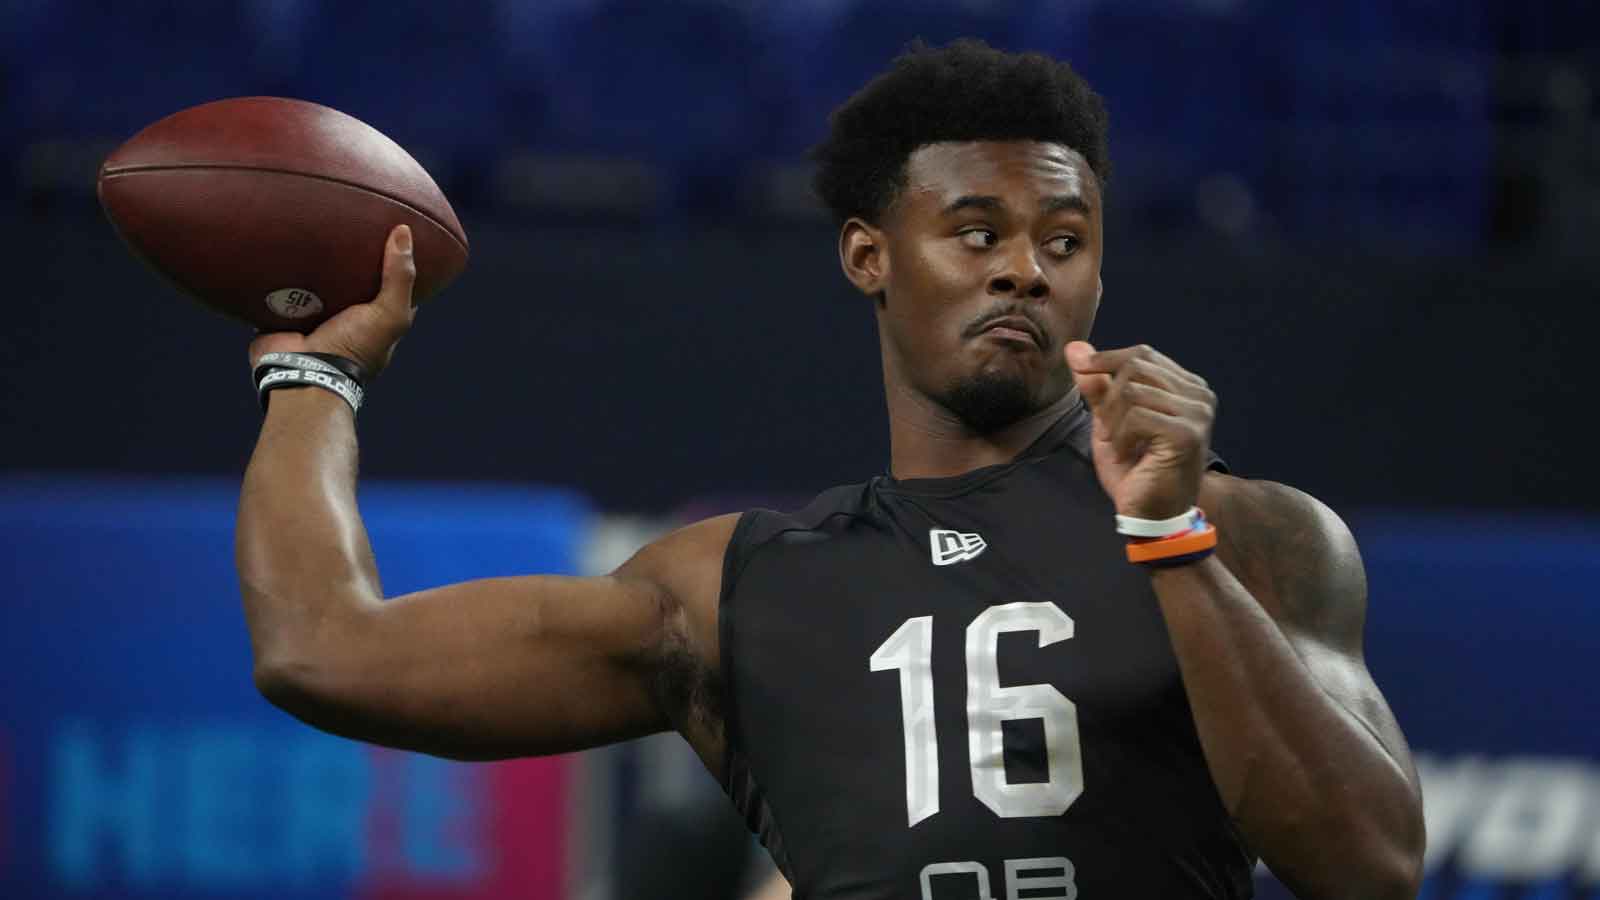 Why Malik Willis will be the first QB taken in the 2022 NFL Draft